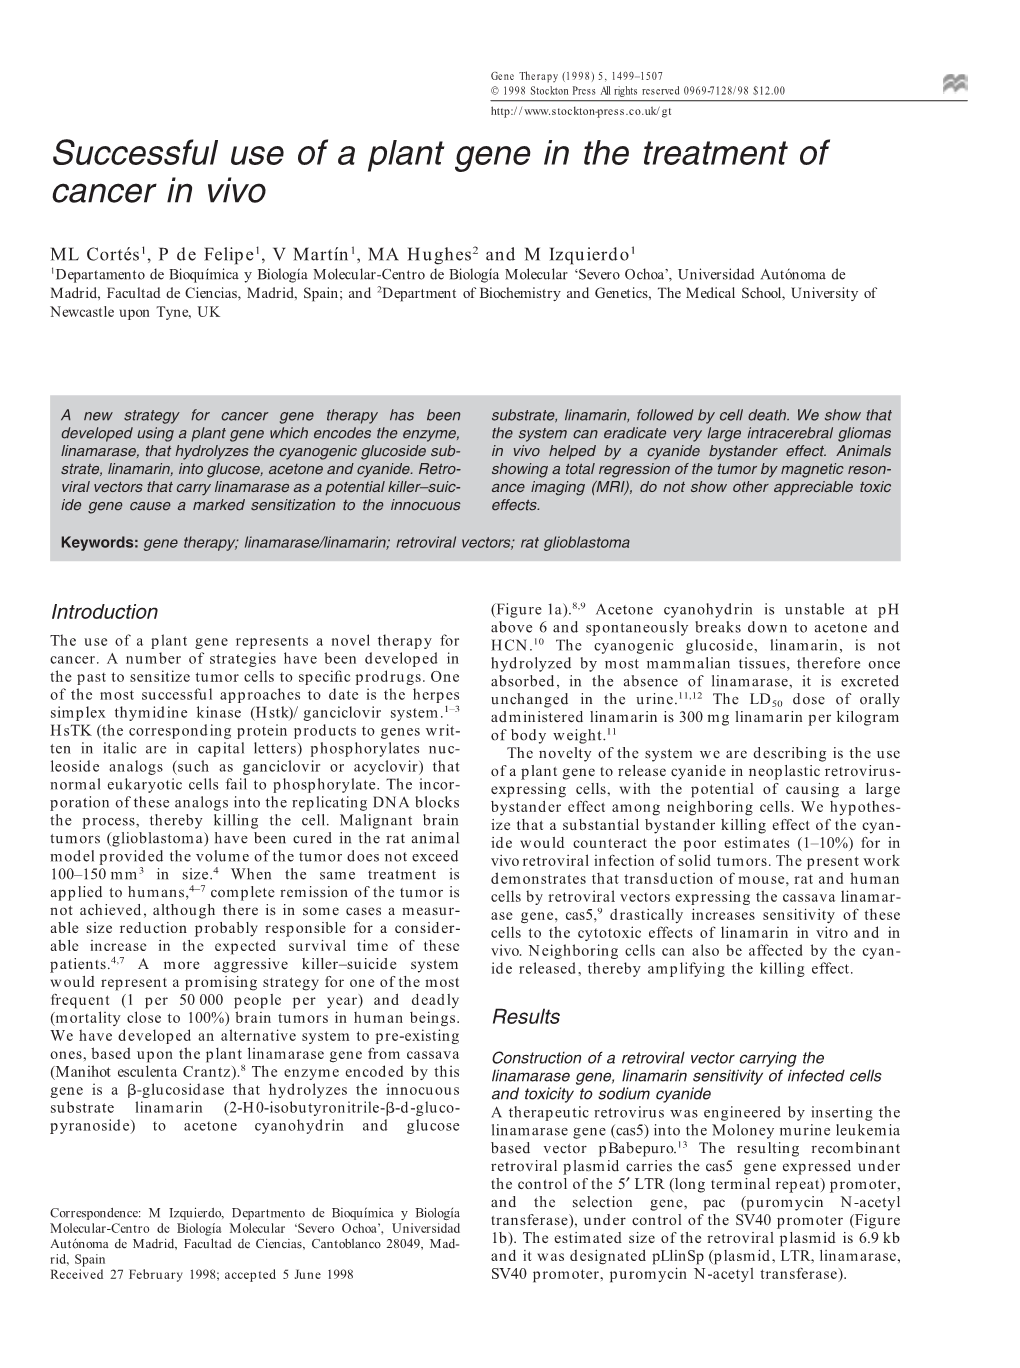 Successful Use of a Plant Gene in the Treatment of Cancer in Vivo